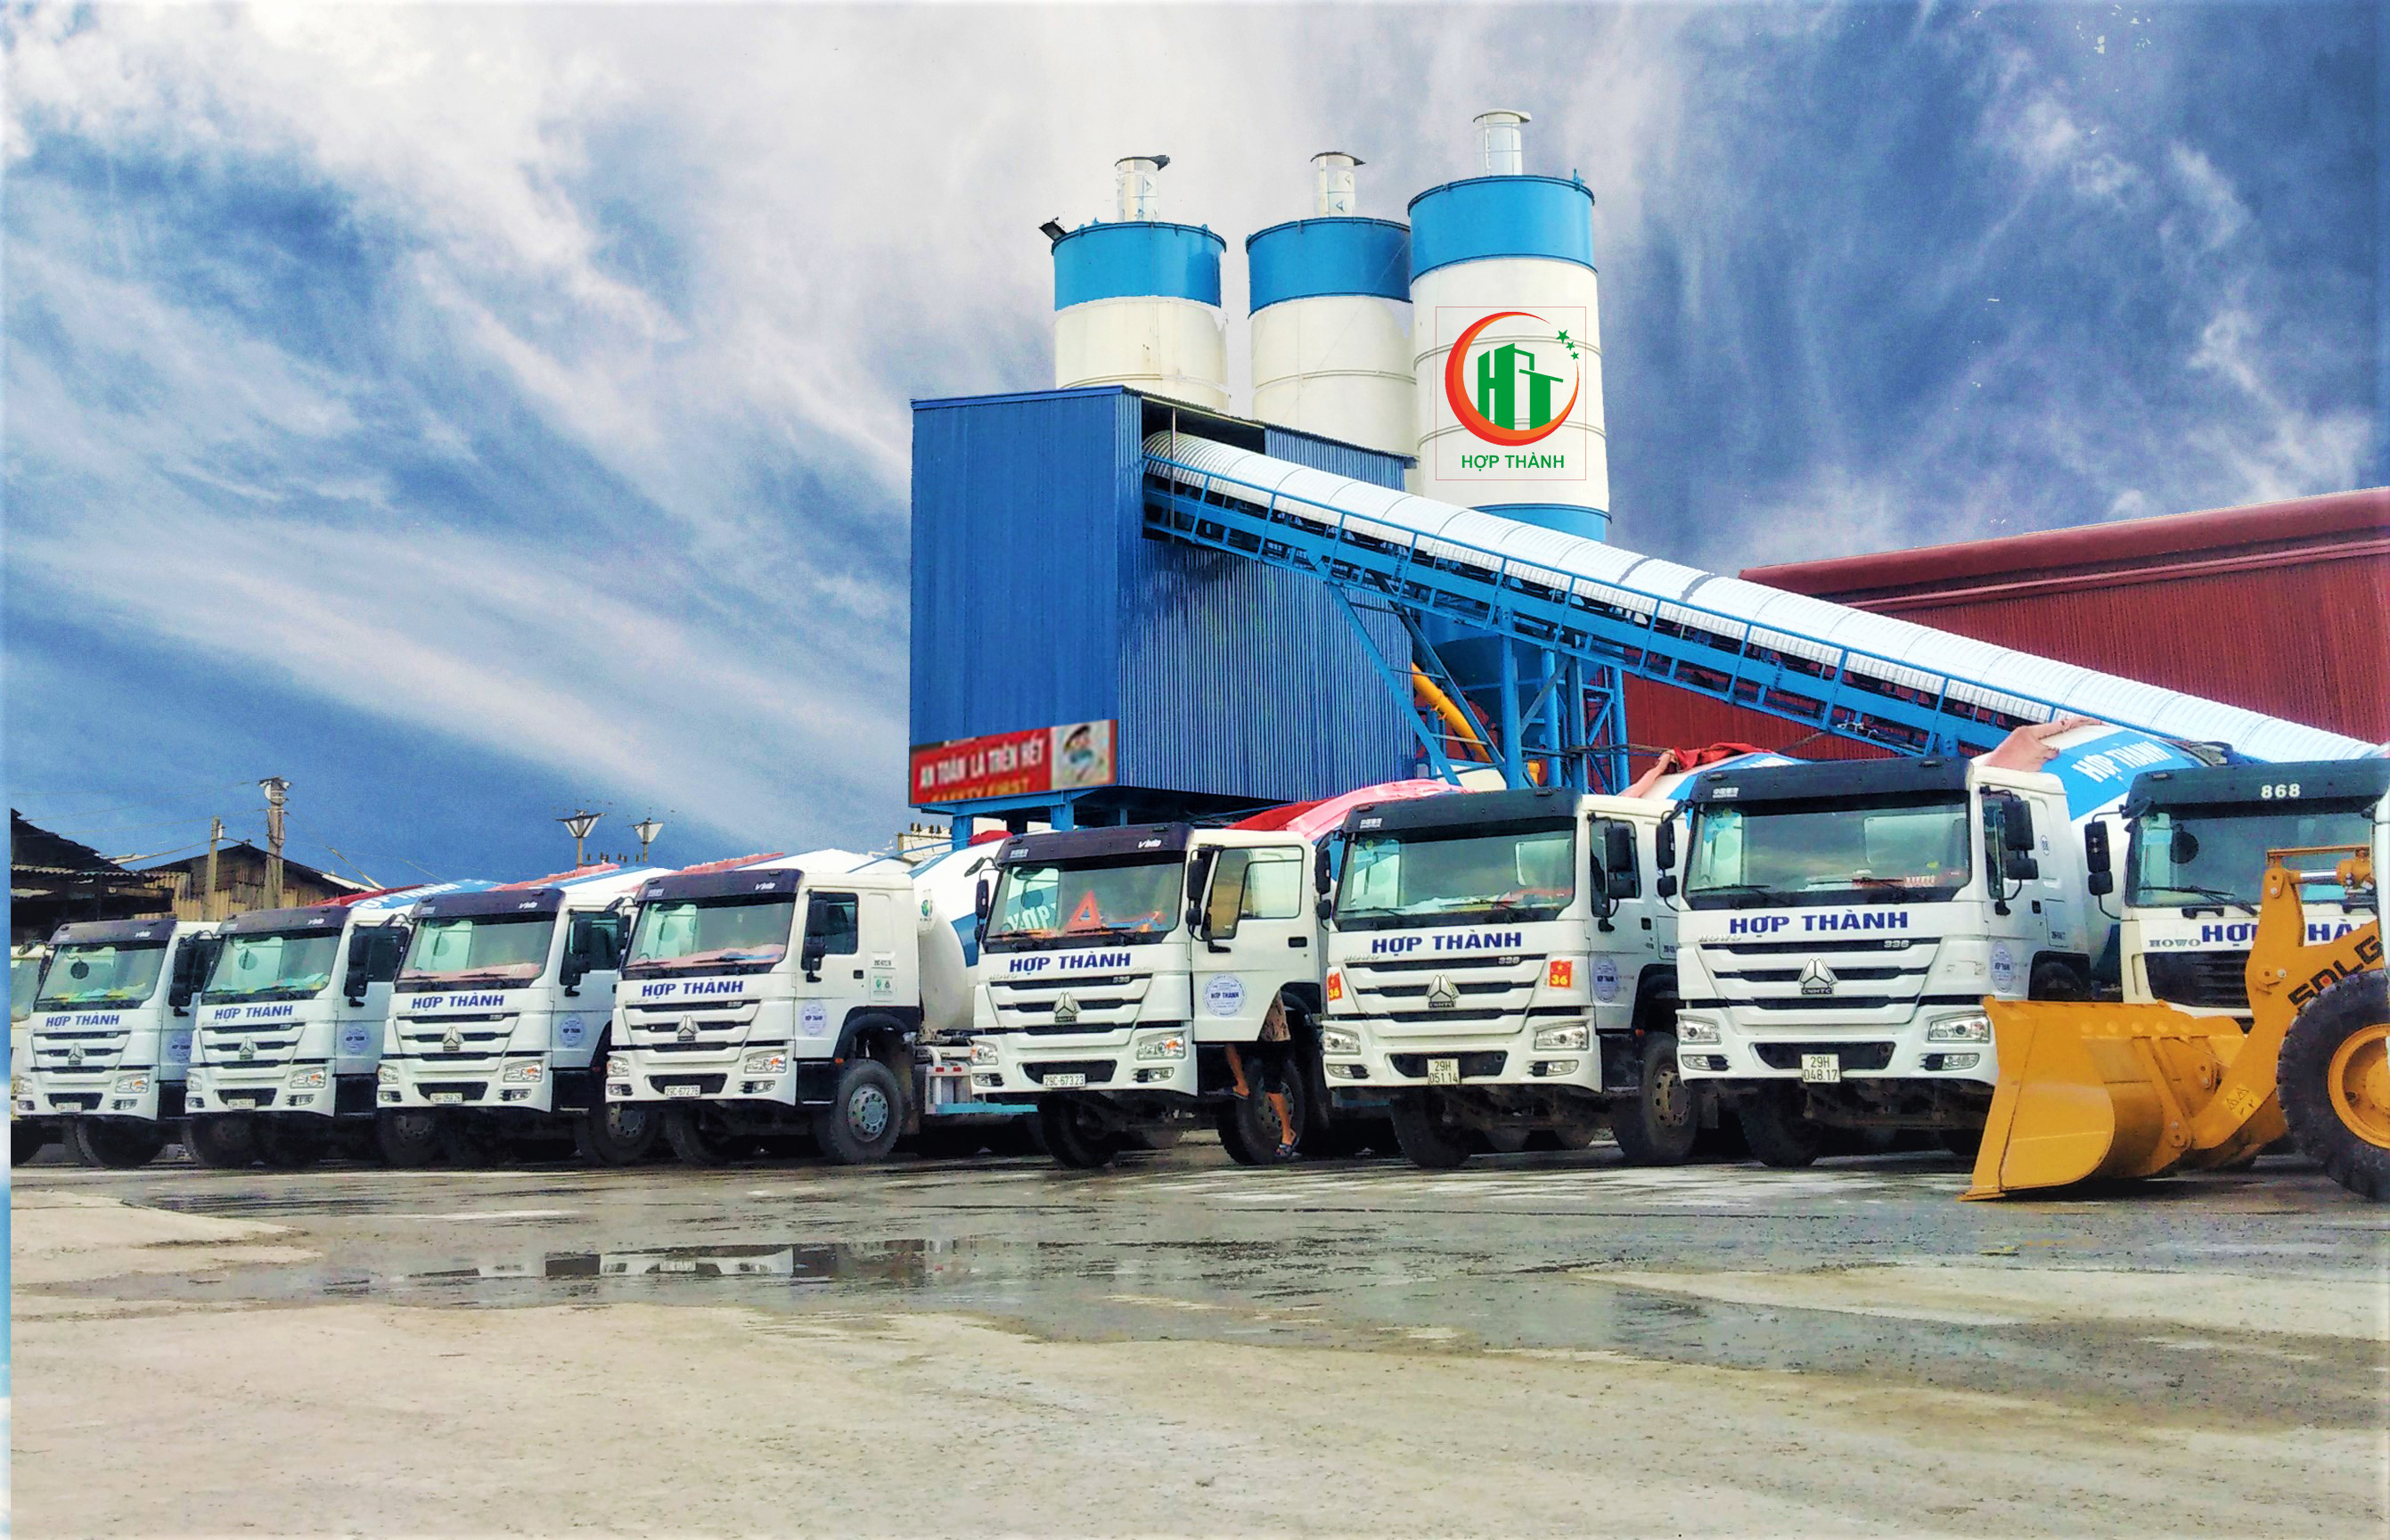 Hop Thanh Concrete continuously won big contracts in the midst of COVID-19